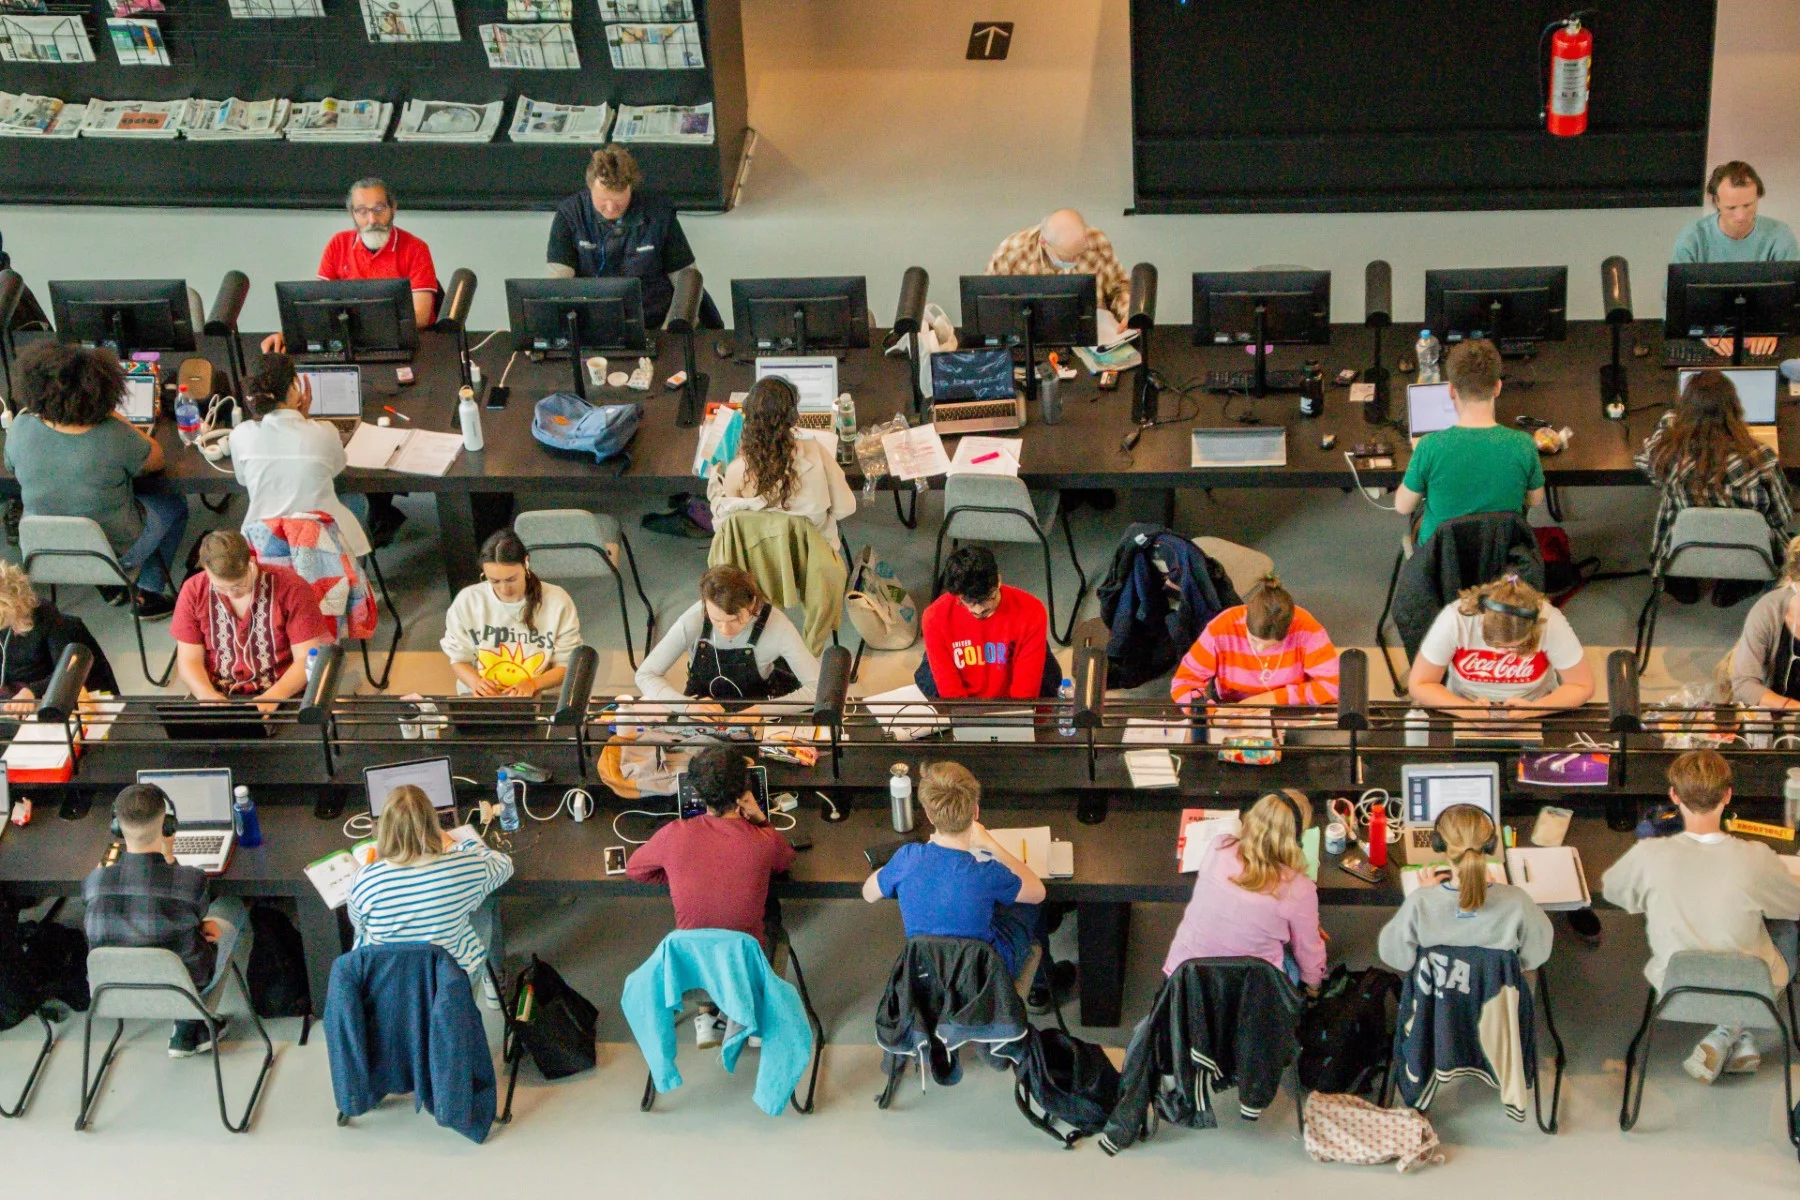 Students sitting at large tables in the University Library of Groningen, the Netherlands.